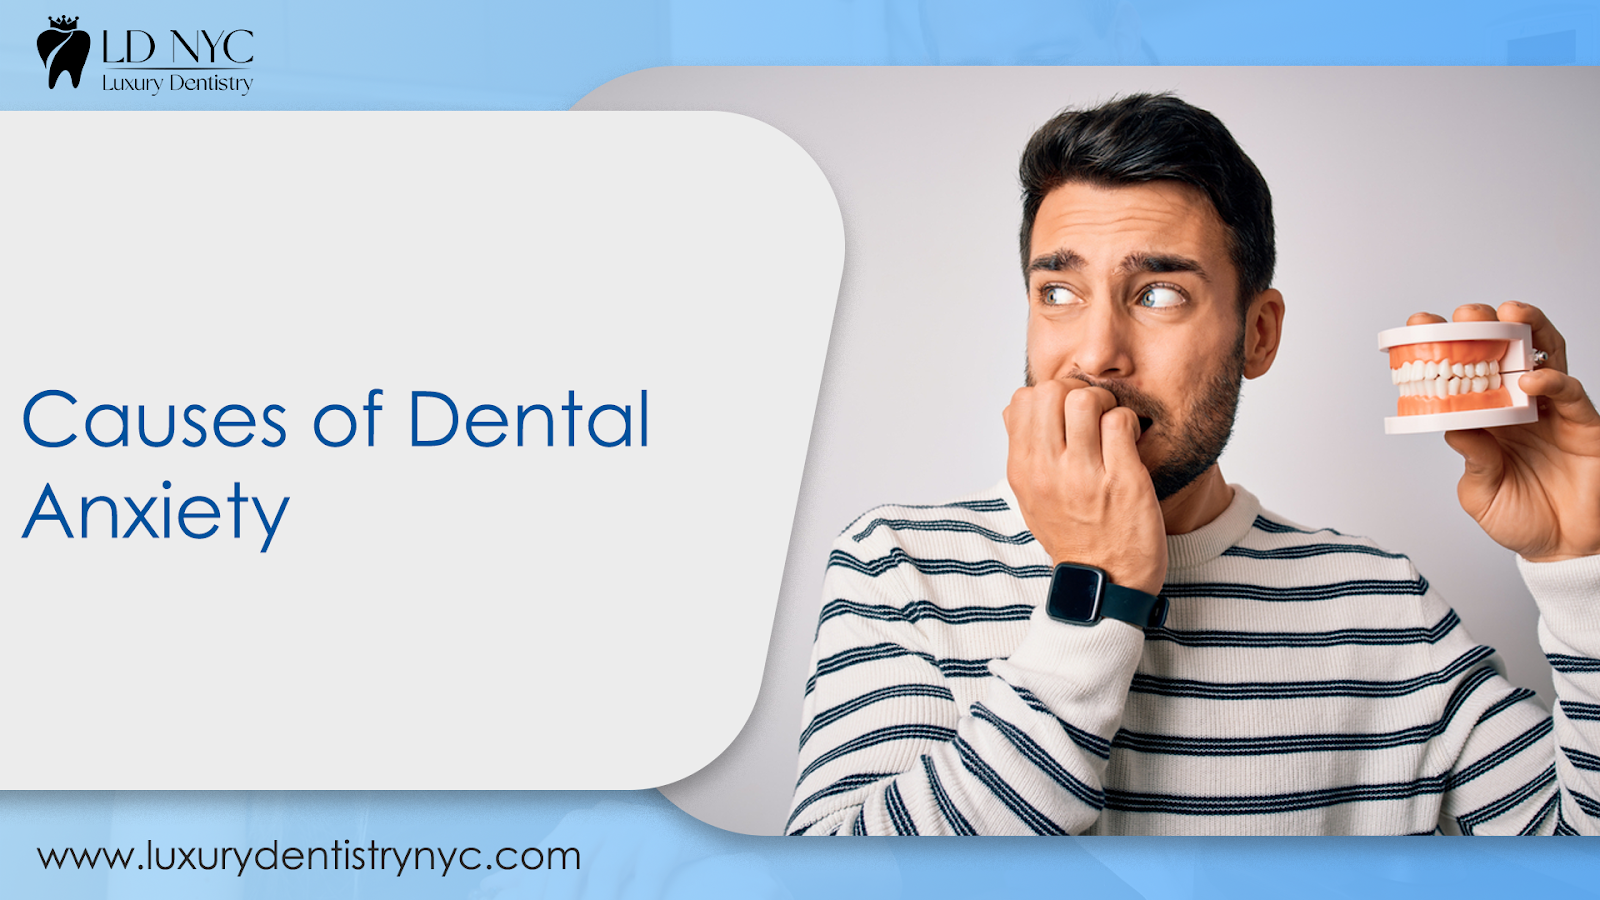 Causes of Dental Anxiety and How to Overcome Them